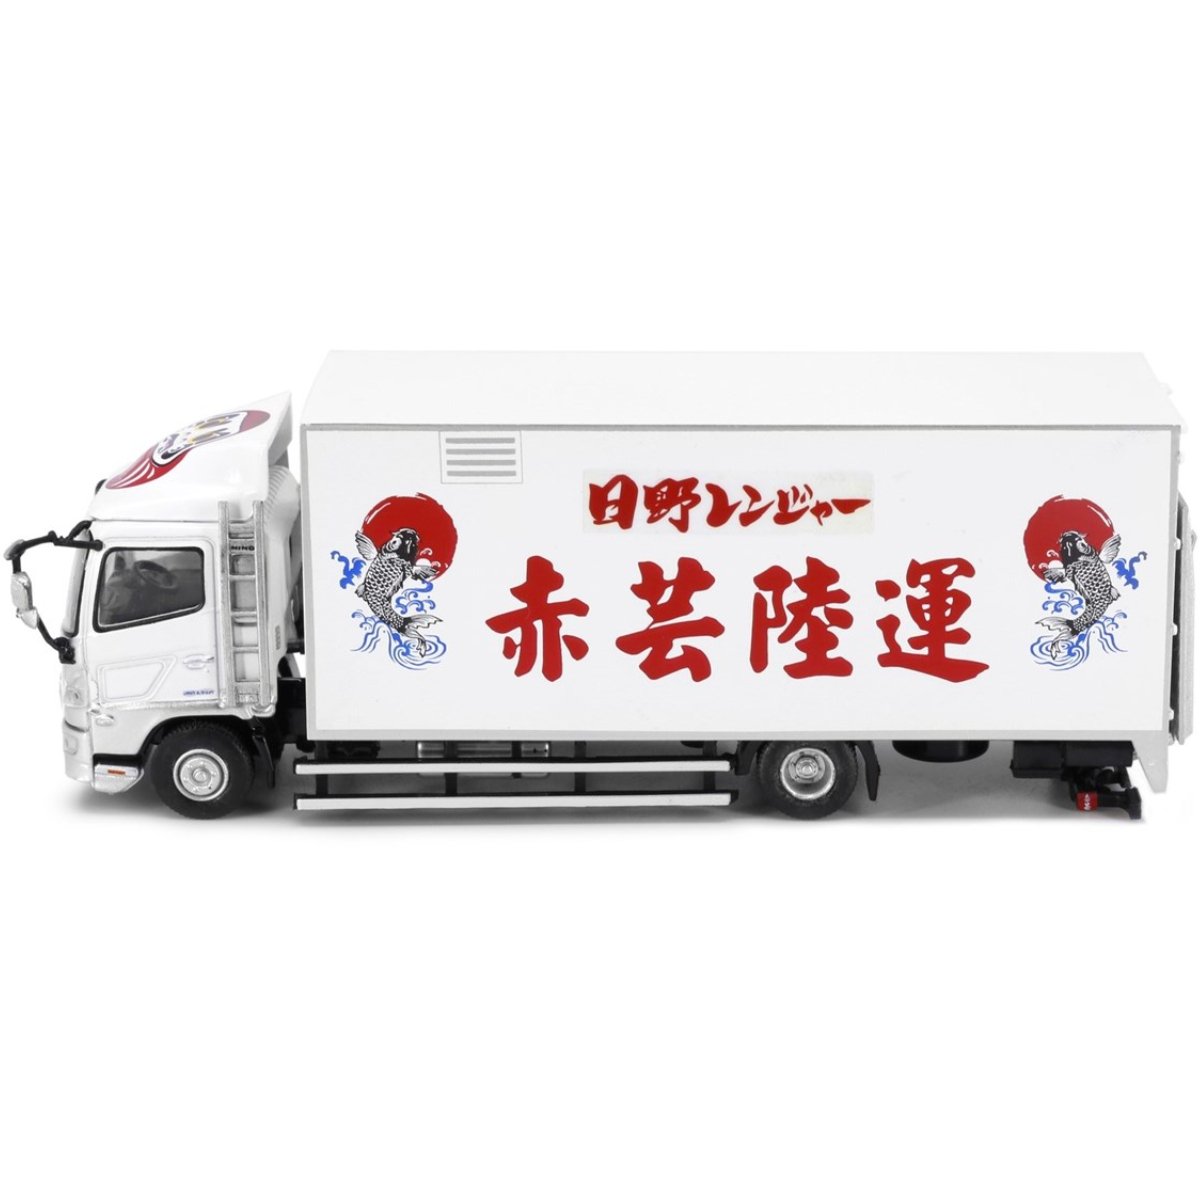 Tiny Models Hino 500 Box Lorry - Red Yun Land Transport (1:76 Scale) - Phillips Hobbies